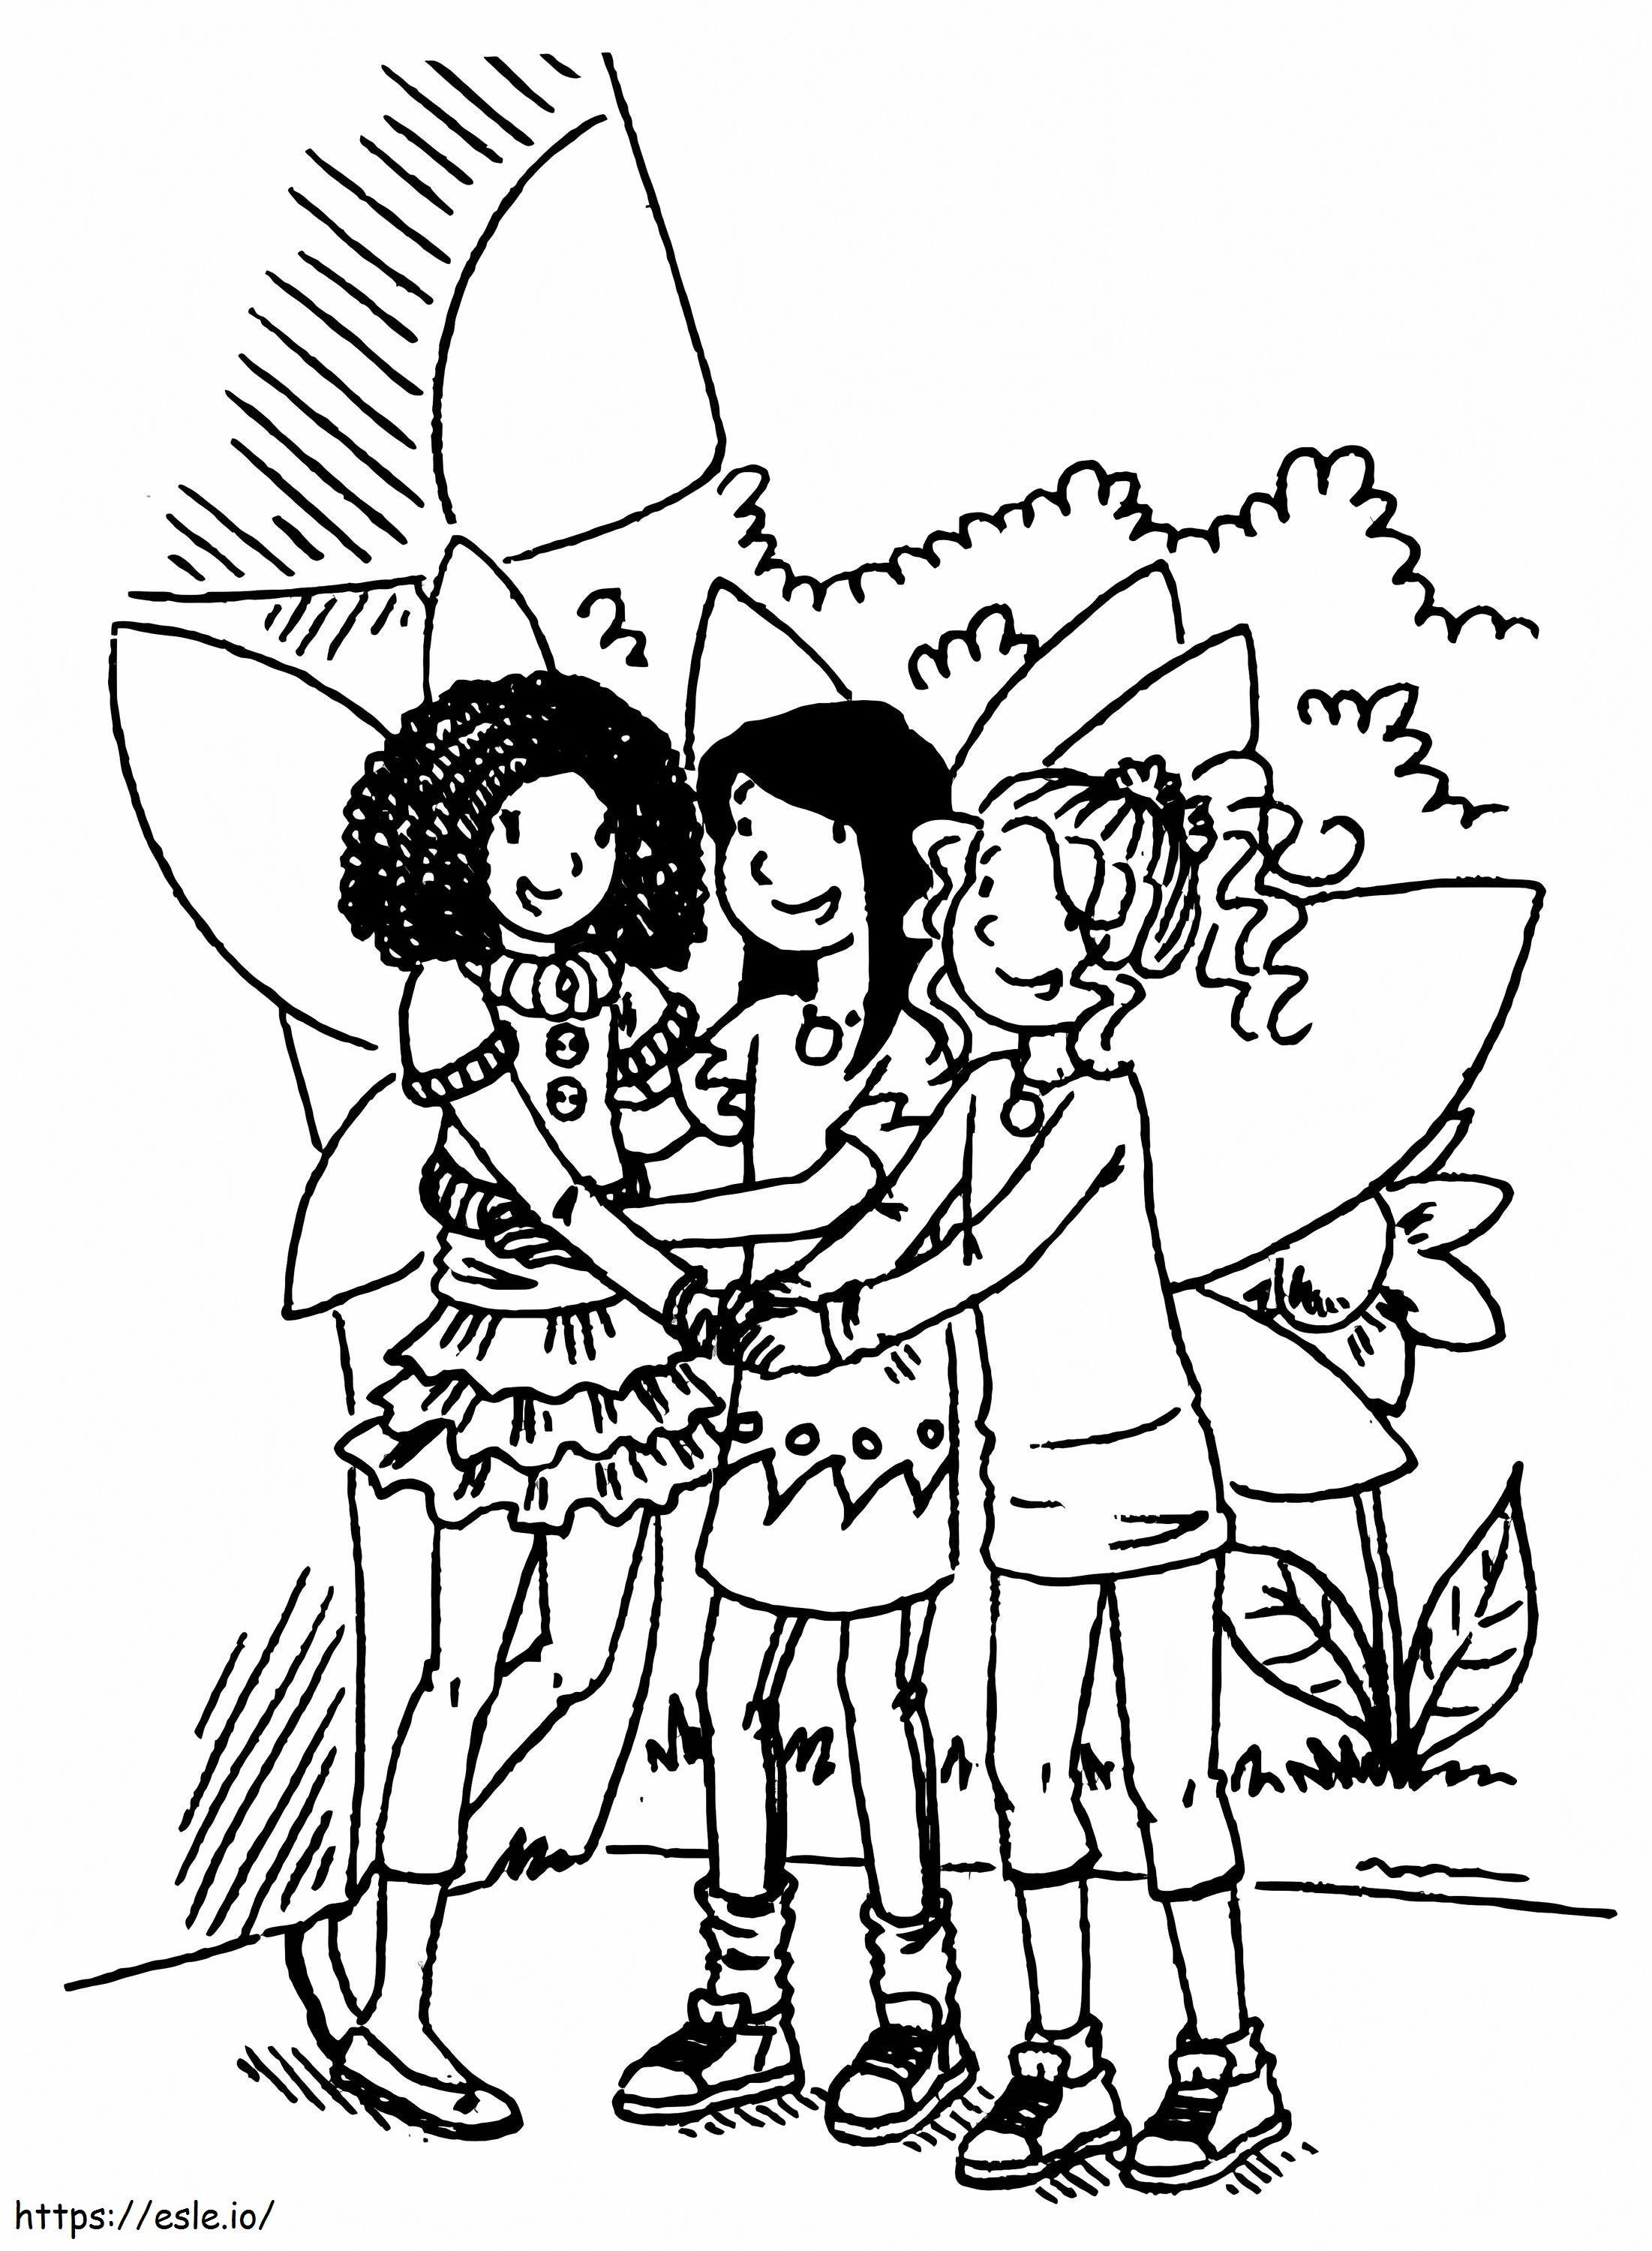 Rainbow Magic For Girls coloring page